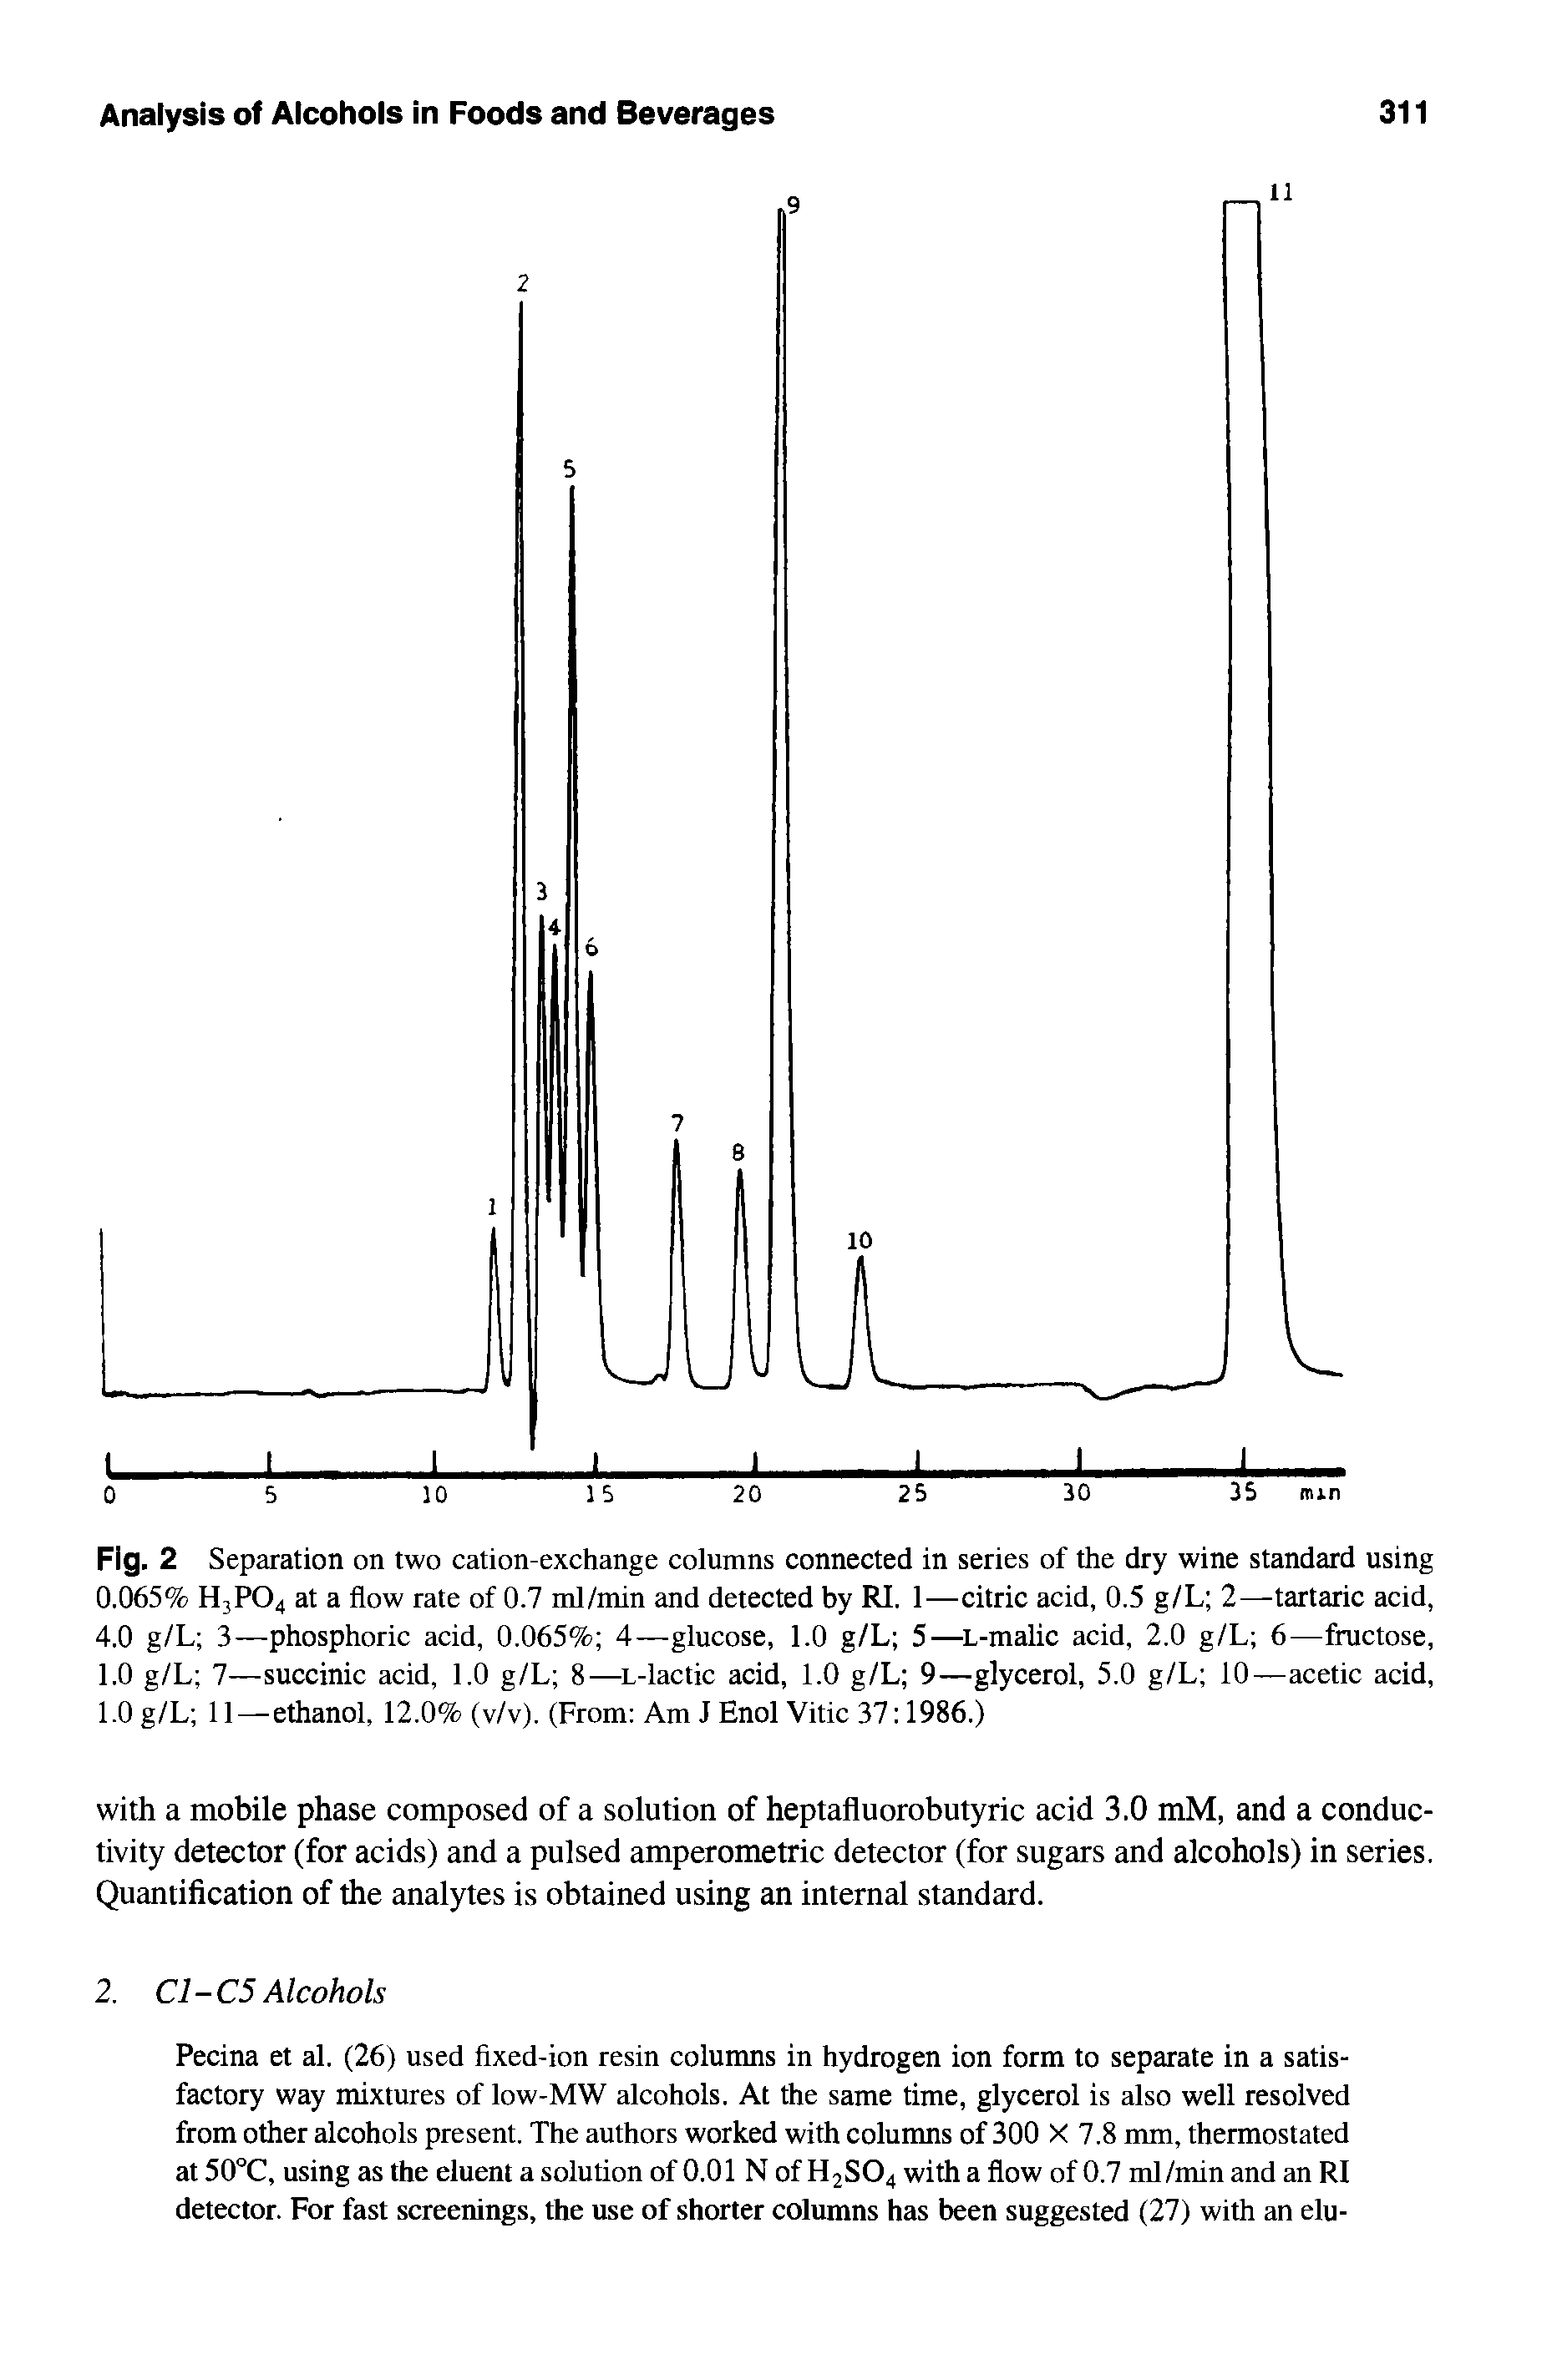 Fig. 2 Separation on two cation-exchange columns connected in series of the dry wine standard using 0.065% H3P04 at a flow rate of 0.7 ml/min and detected by RI. 1—citric acid, 0.5 g/L 2—tartaric acid,...